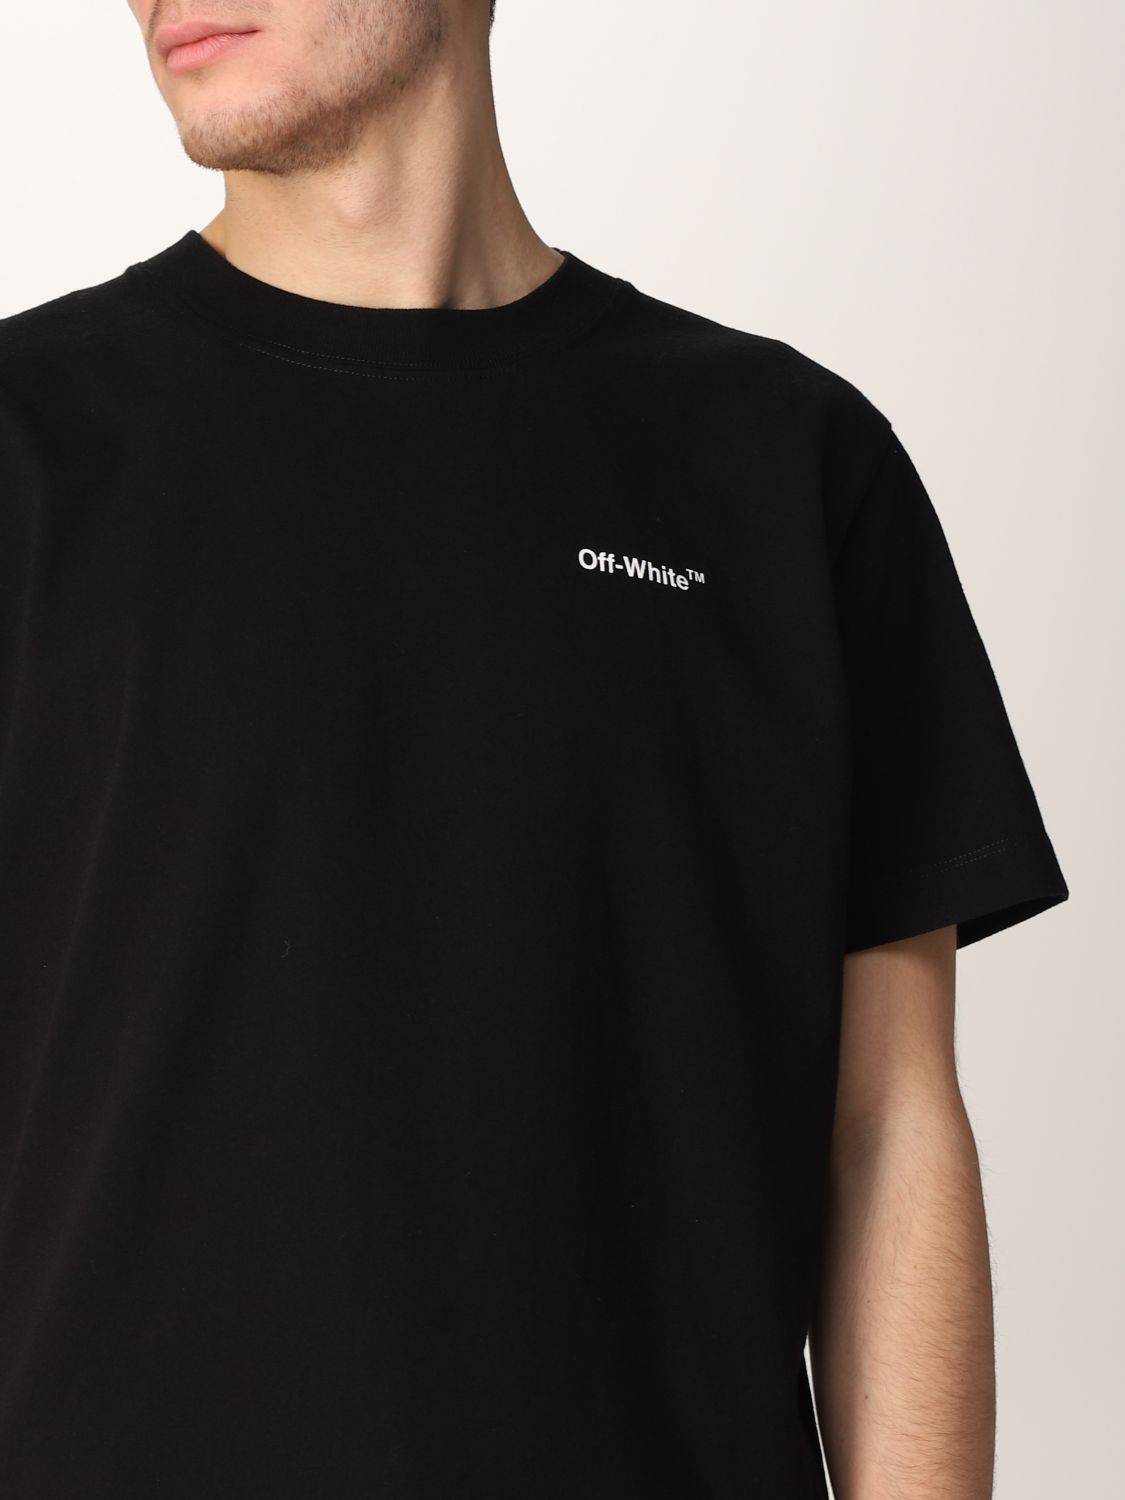 OFF-WHITE™ C/O ANDRÉ SARAIVA T-SHIRT in black